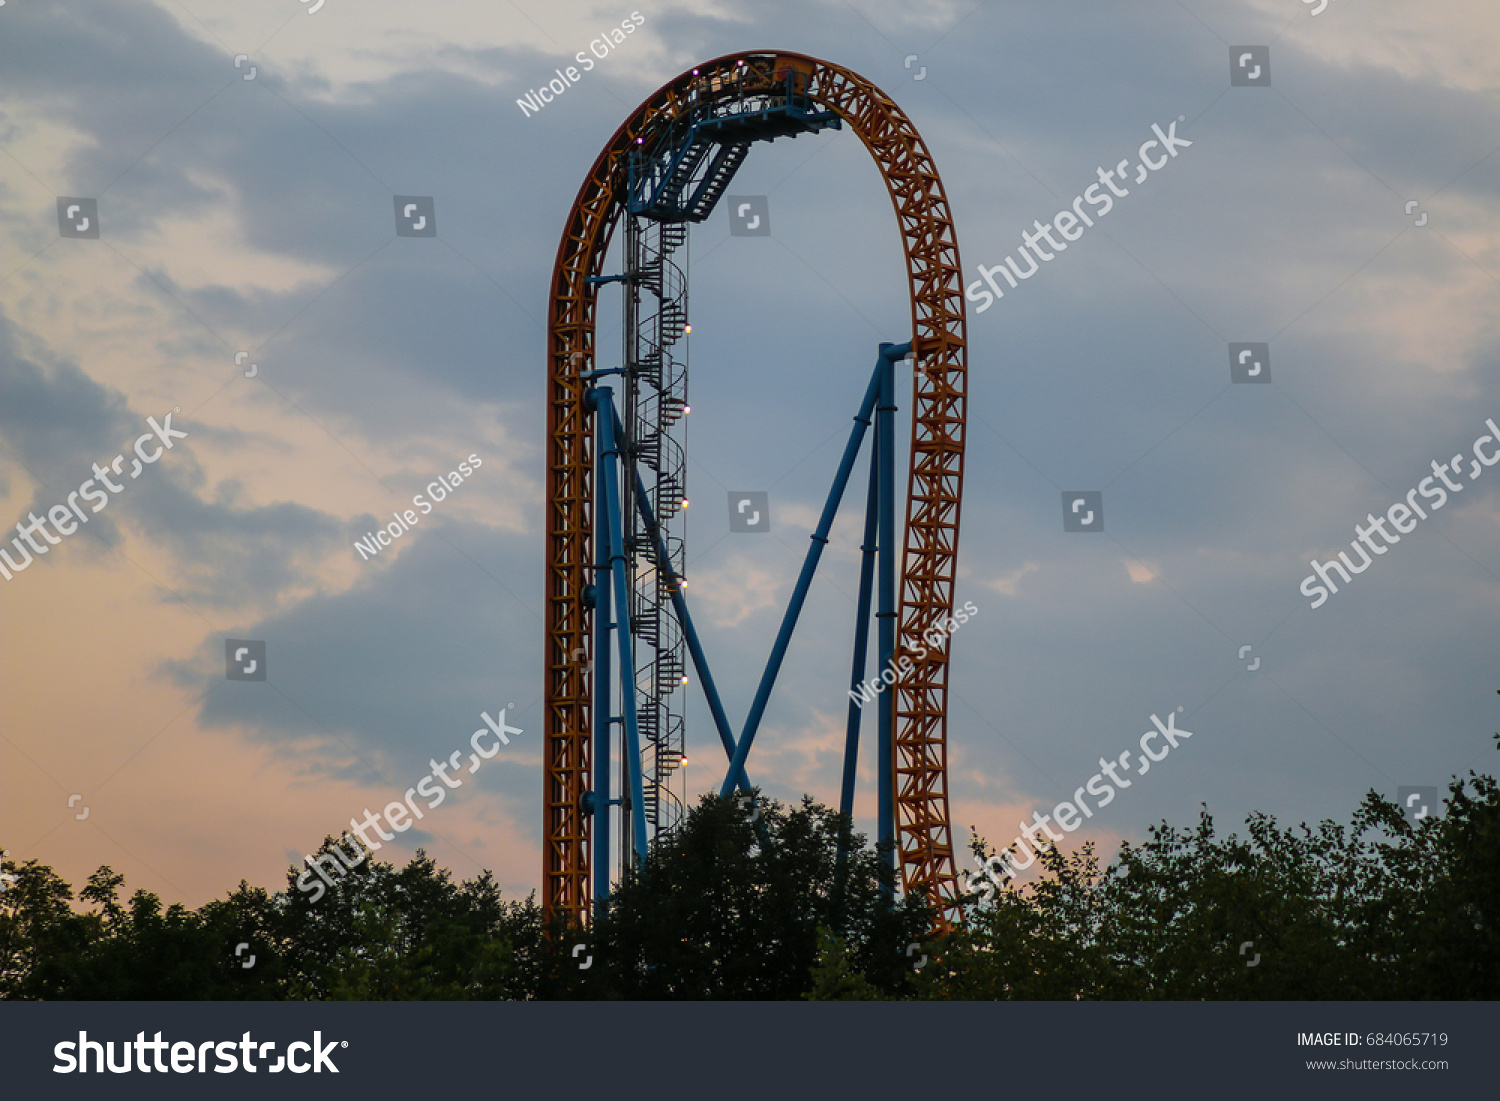 Hershey, PA - July 24, 2017: A view of a roller coaster ride at Hersheypark at sunset. #684065719